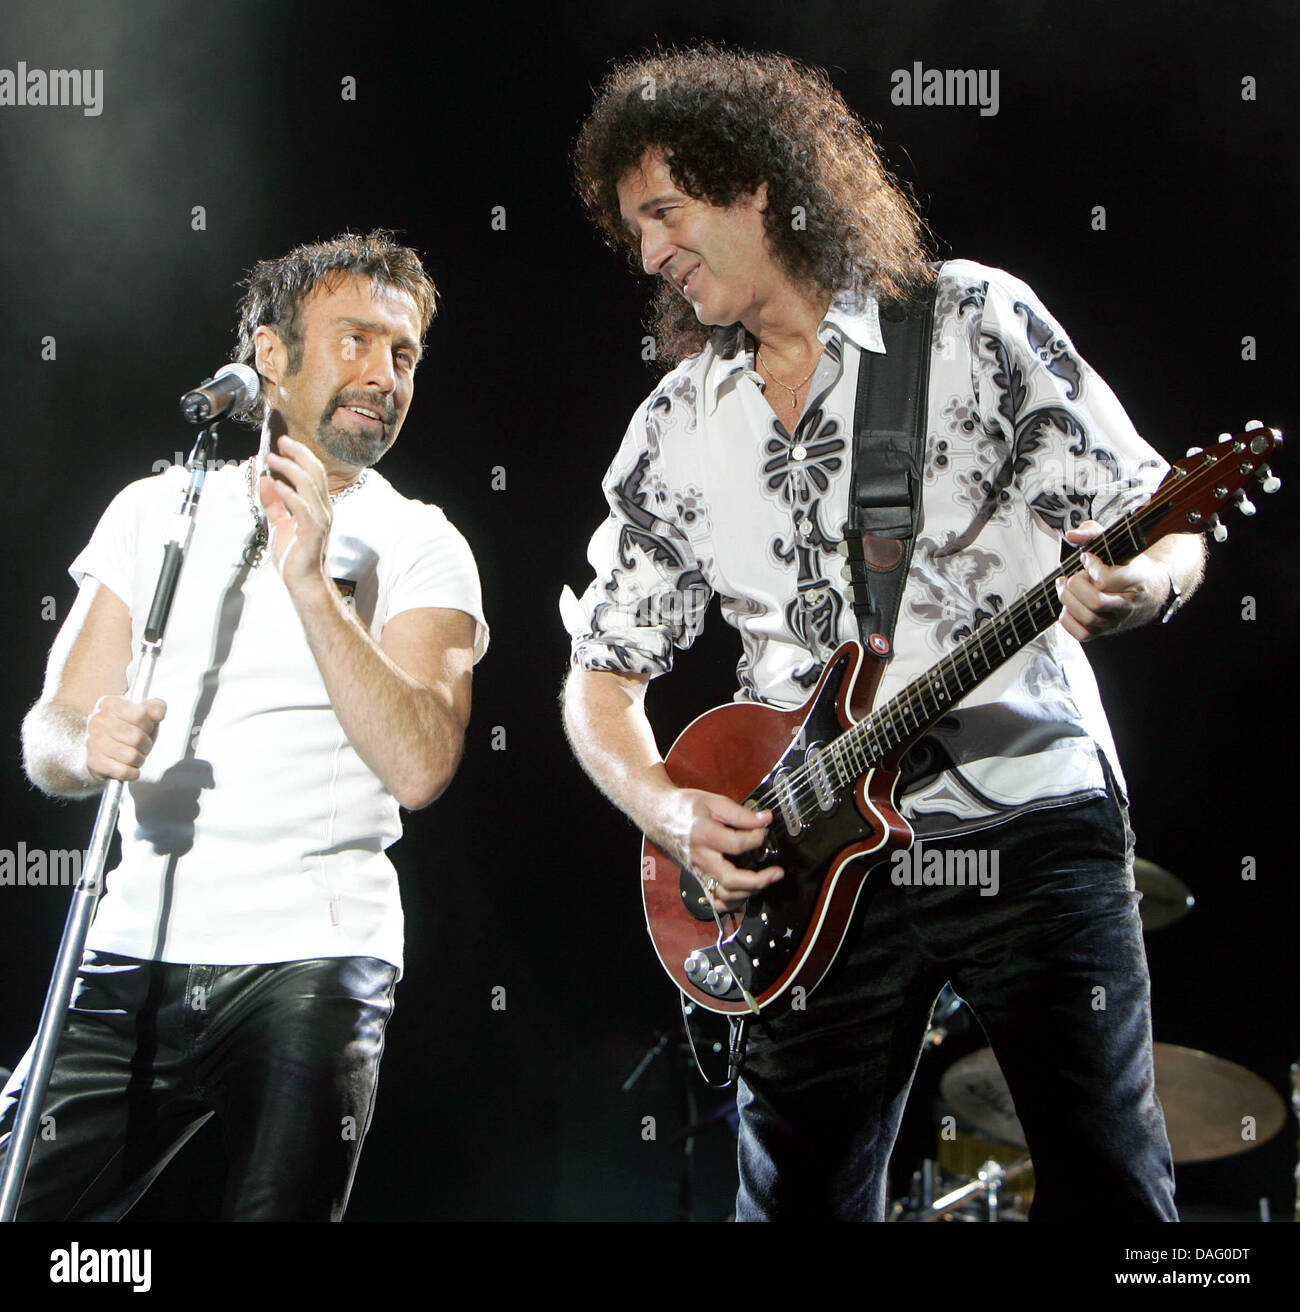 (dpa file) A file picture dated 06 July 2005 showing Queen member Brian May (R) and singer Paul Rodgers (L) in Cologne, Germany. For many fans Queen died along with Freddie Mercury in November 1991. Gut guitarrist Brian May and percussionist roger Taylor continued the band and are now celebrating Queen's 40th birthday. Photo: Rolf Vennenbernd Stock Photo